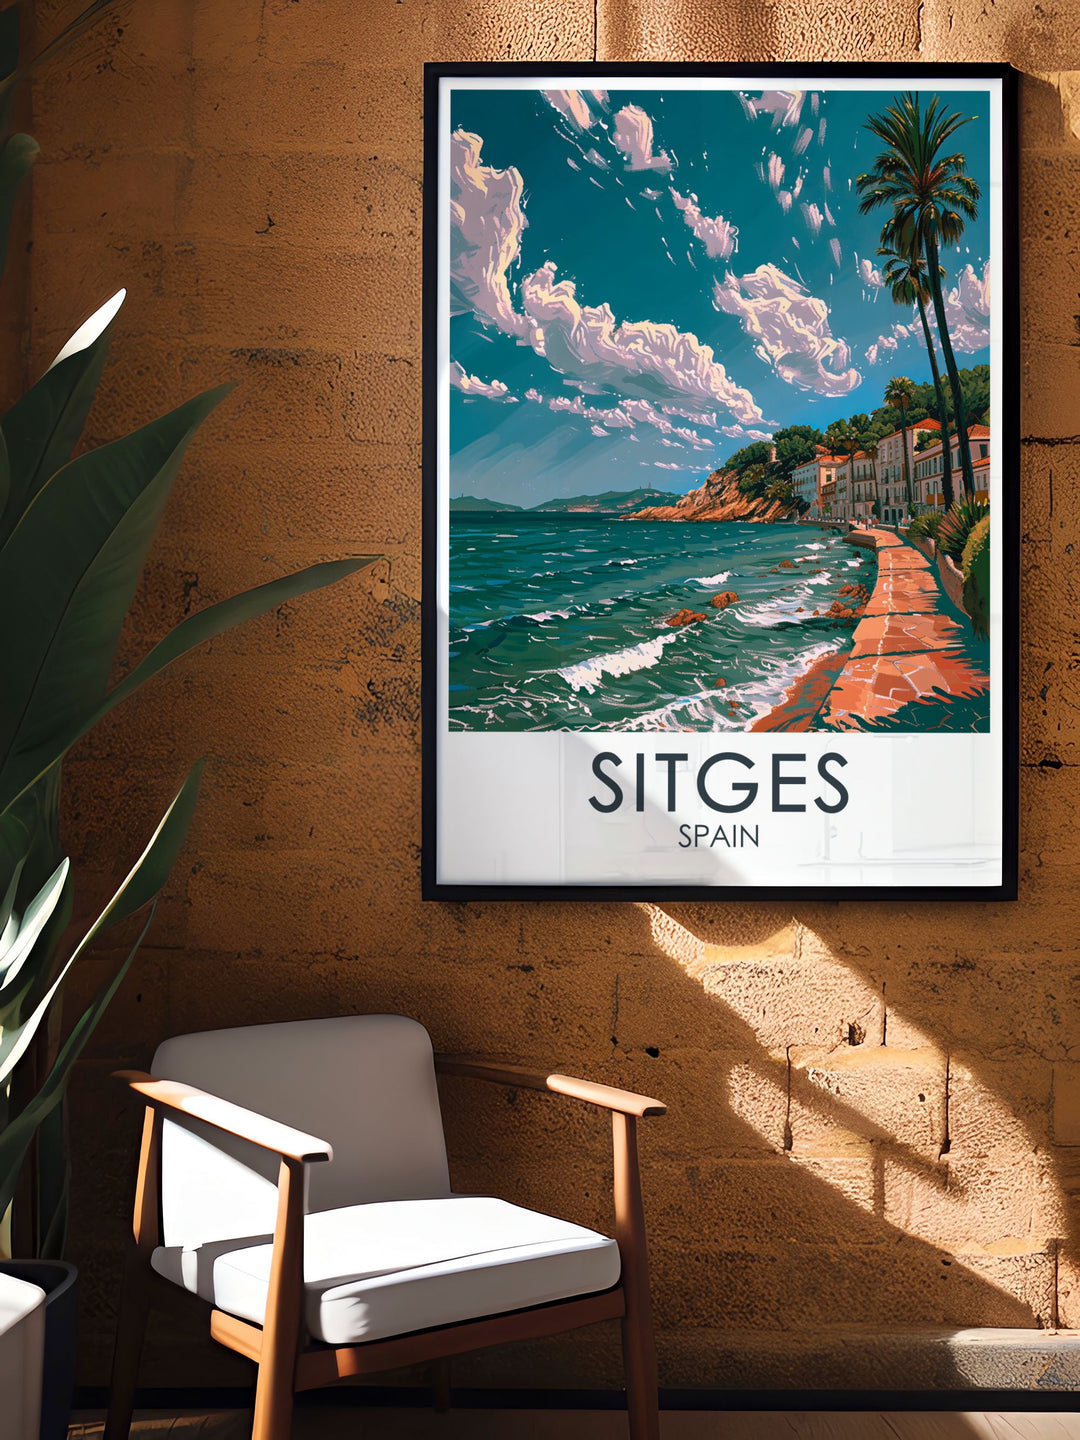 The picturesque Promenade and vibrant streets of Sitges in Spain are beautifully illustrated in this poster, offering a glimpse into its serene and inviting atmosphere, ideal for any coastal art collection.